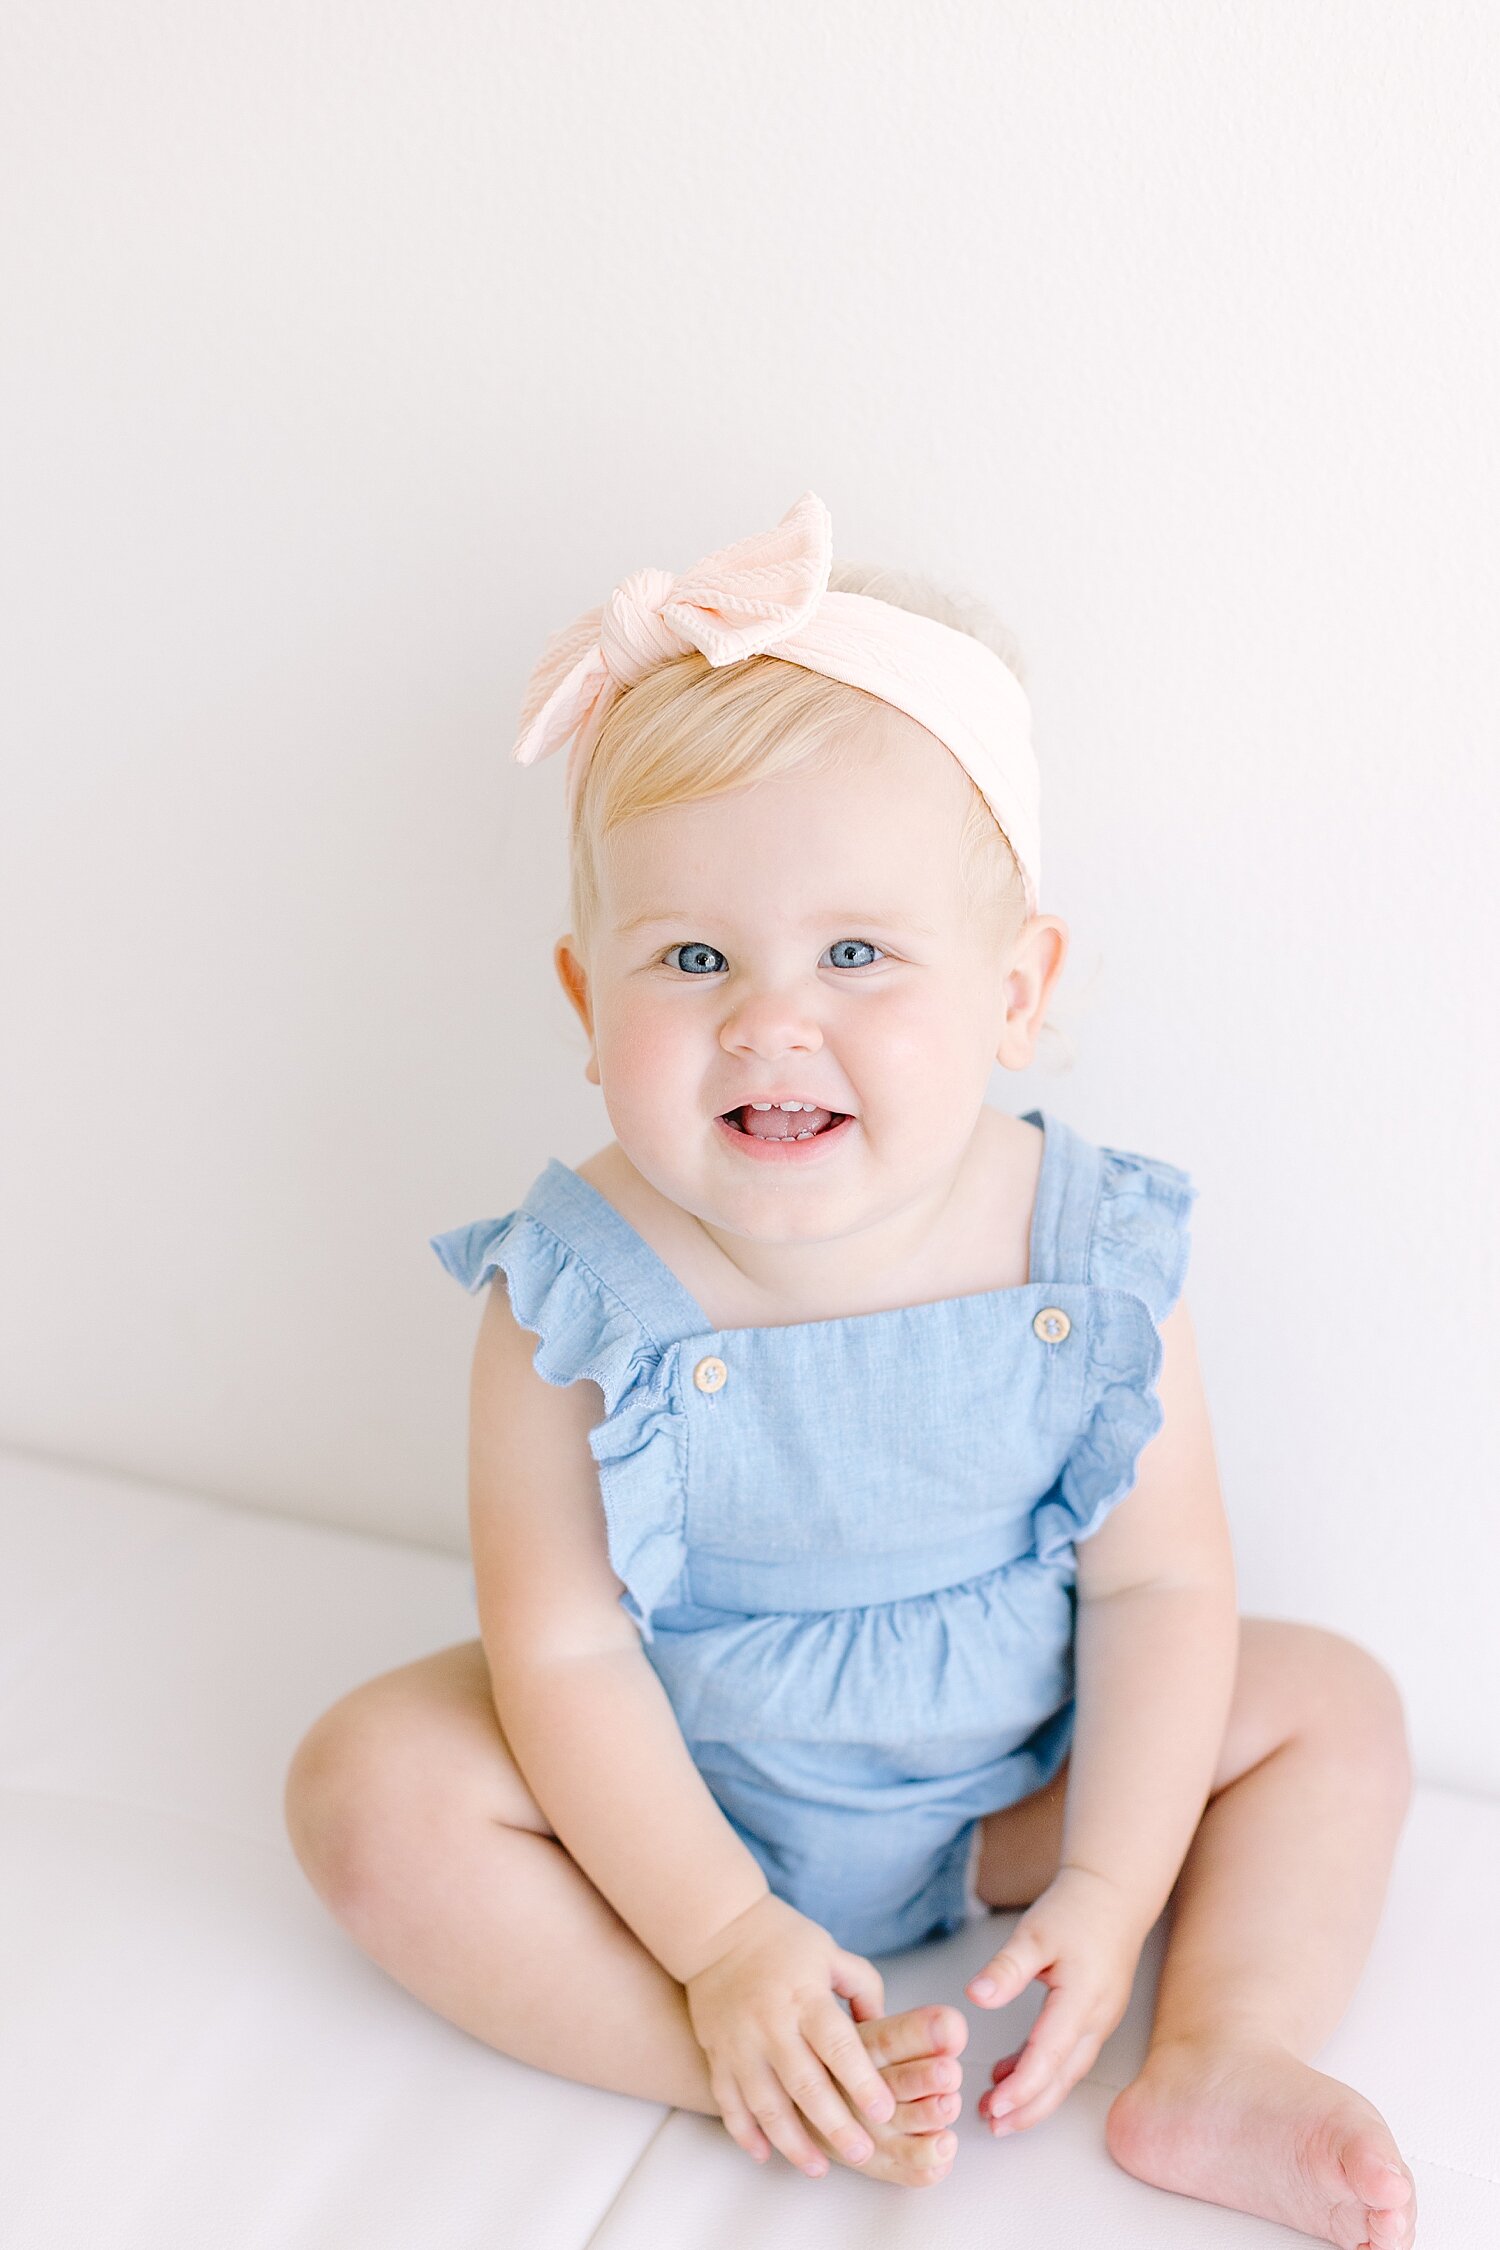 One year old baby girl in Newport Beach studio for first birthday session with Ambre Williams Photography.